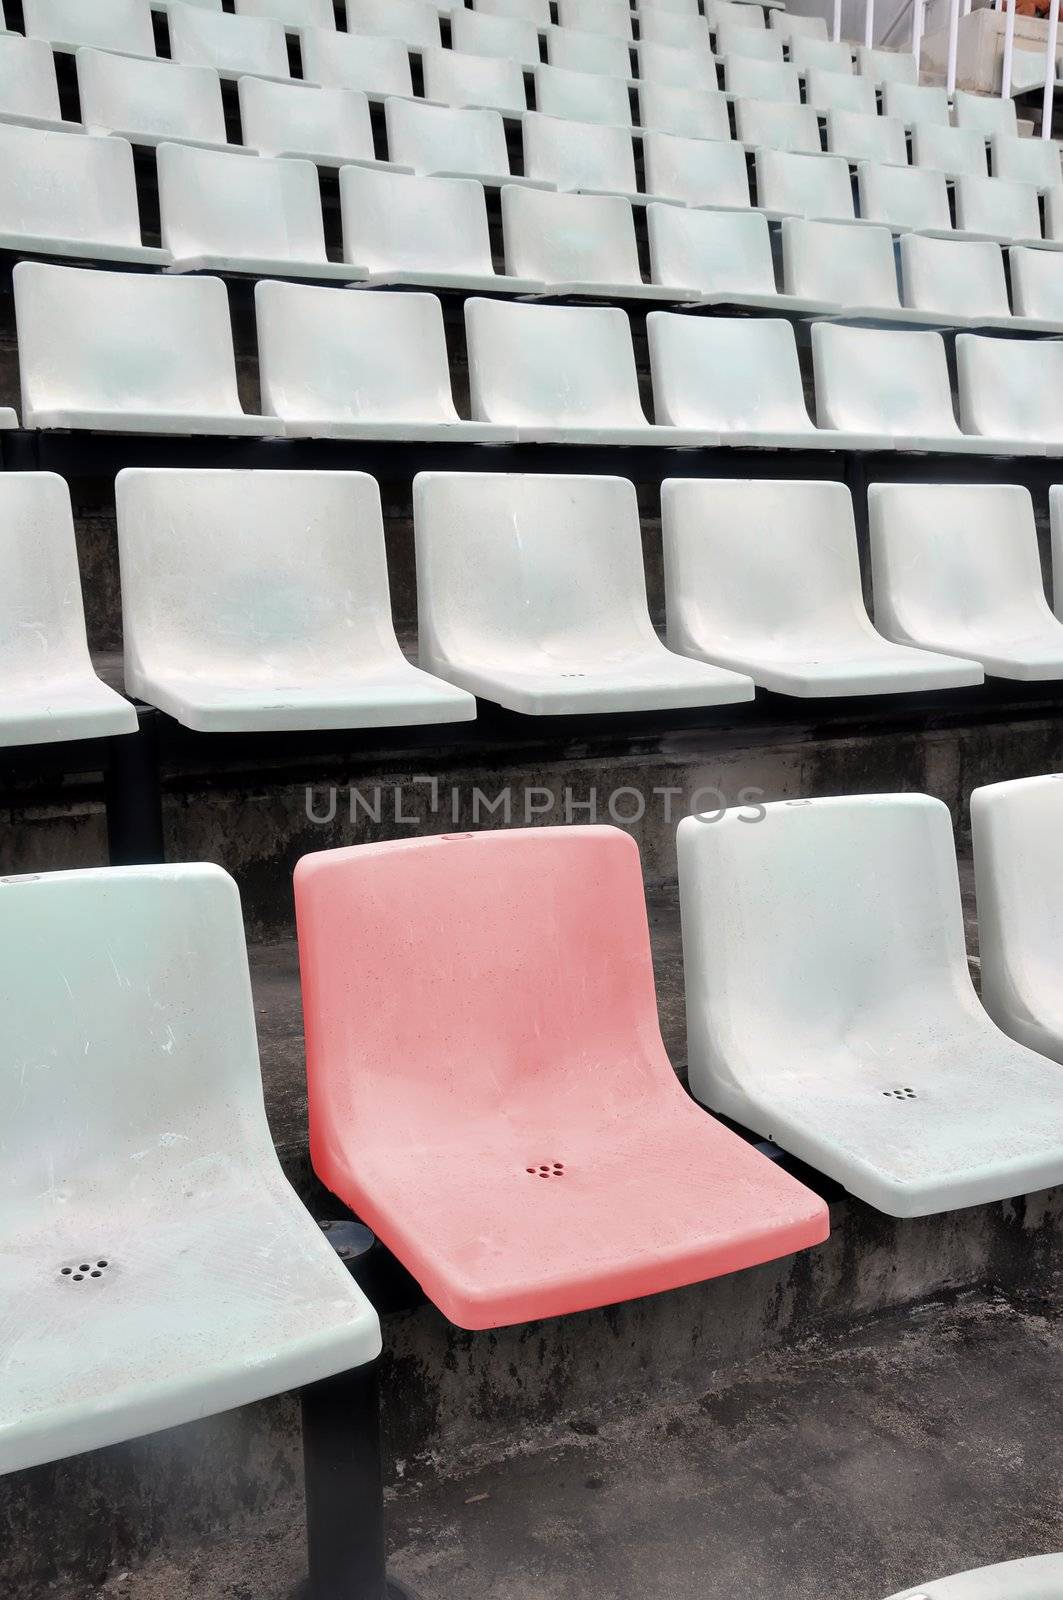 A single red chair in a multitude of white chair